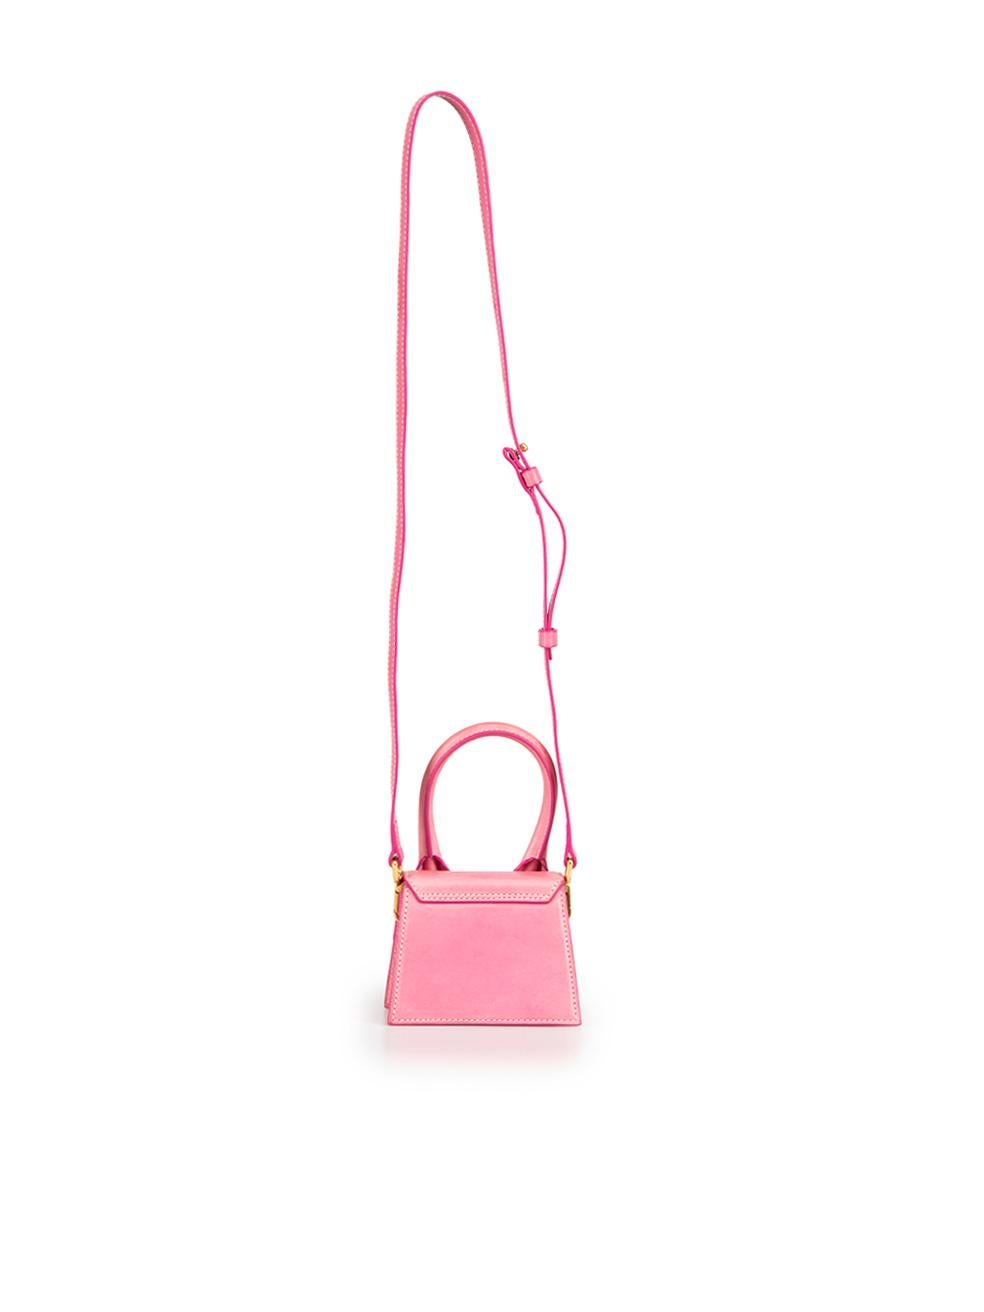 Jacquemus Pink Leather Le Chiquito Top Handle Bag In Good Condition For Sale In London, GB